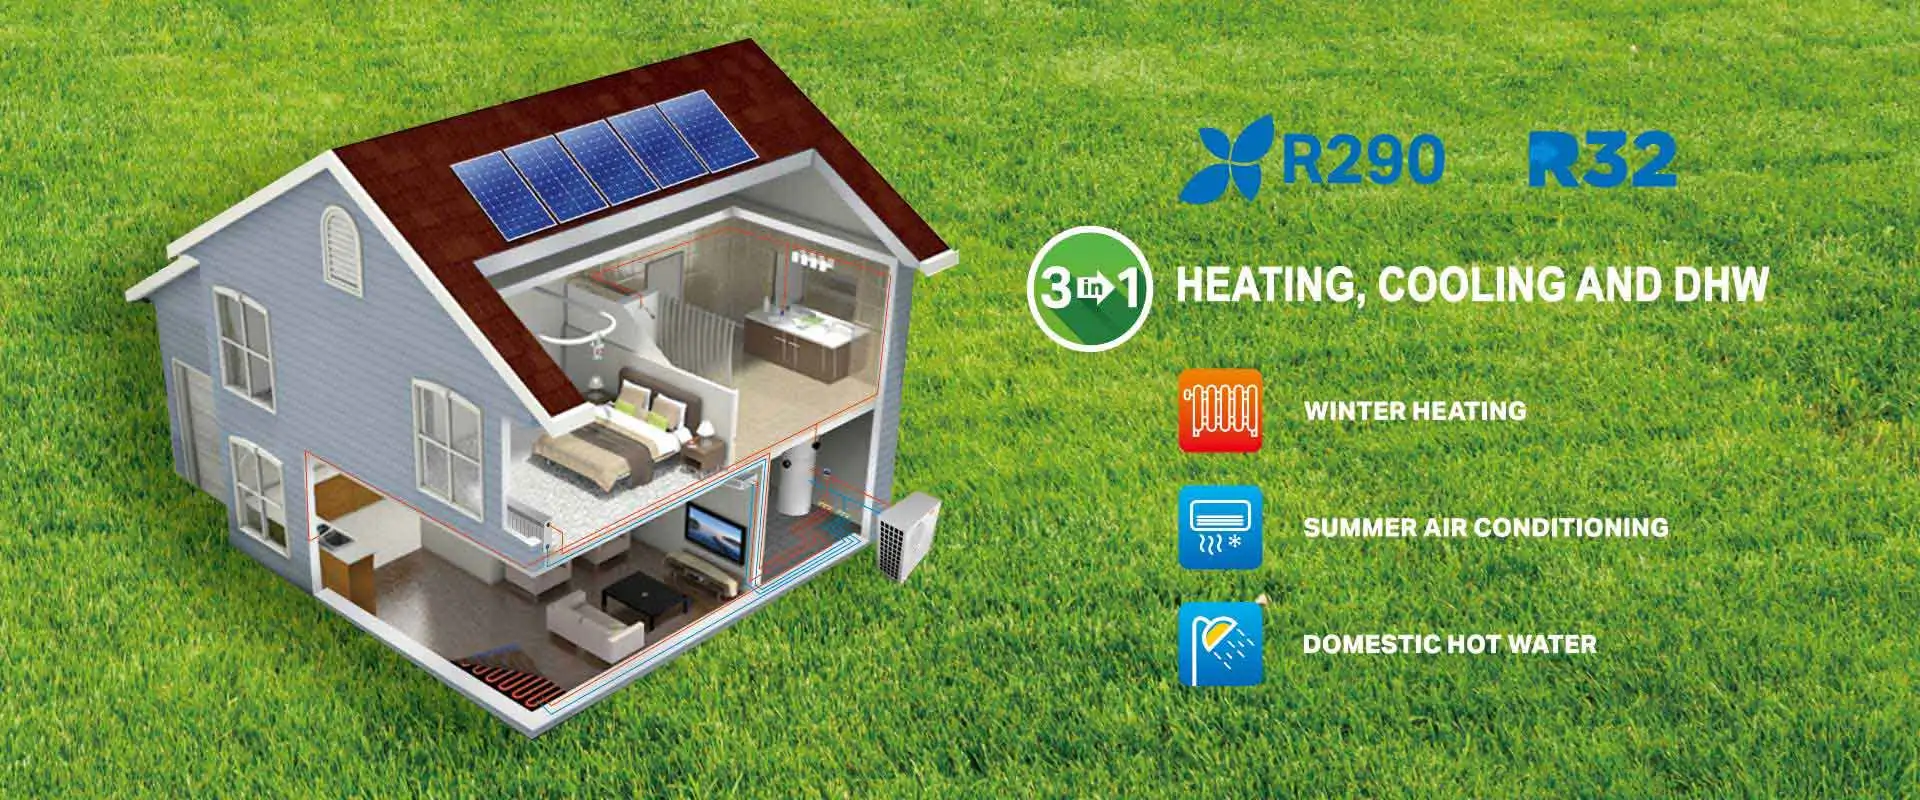 Heat Pump for Heating, Cooling and DHW